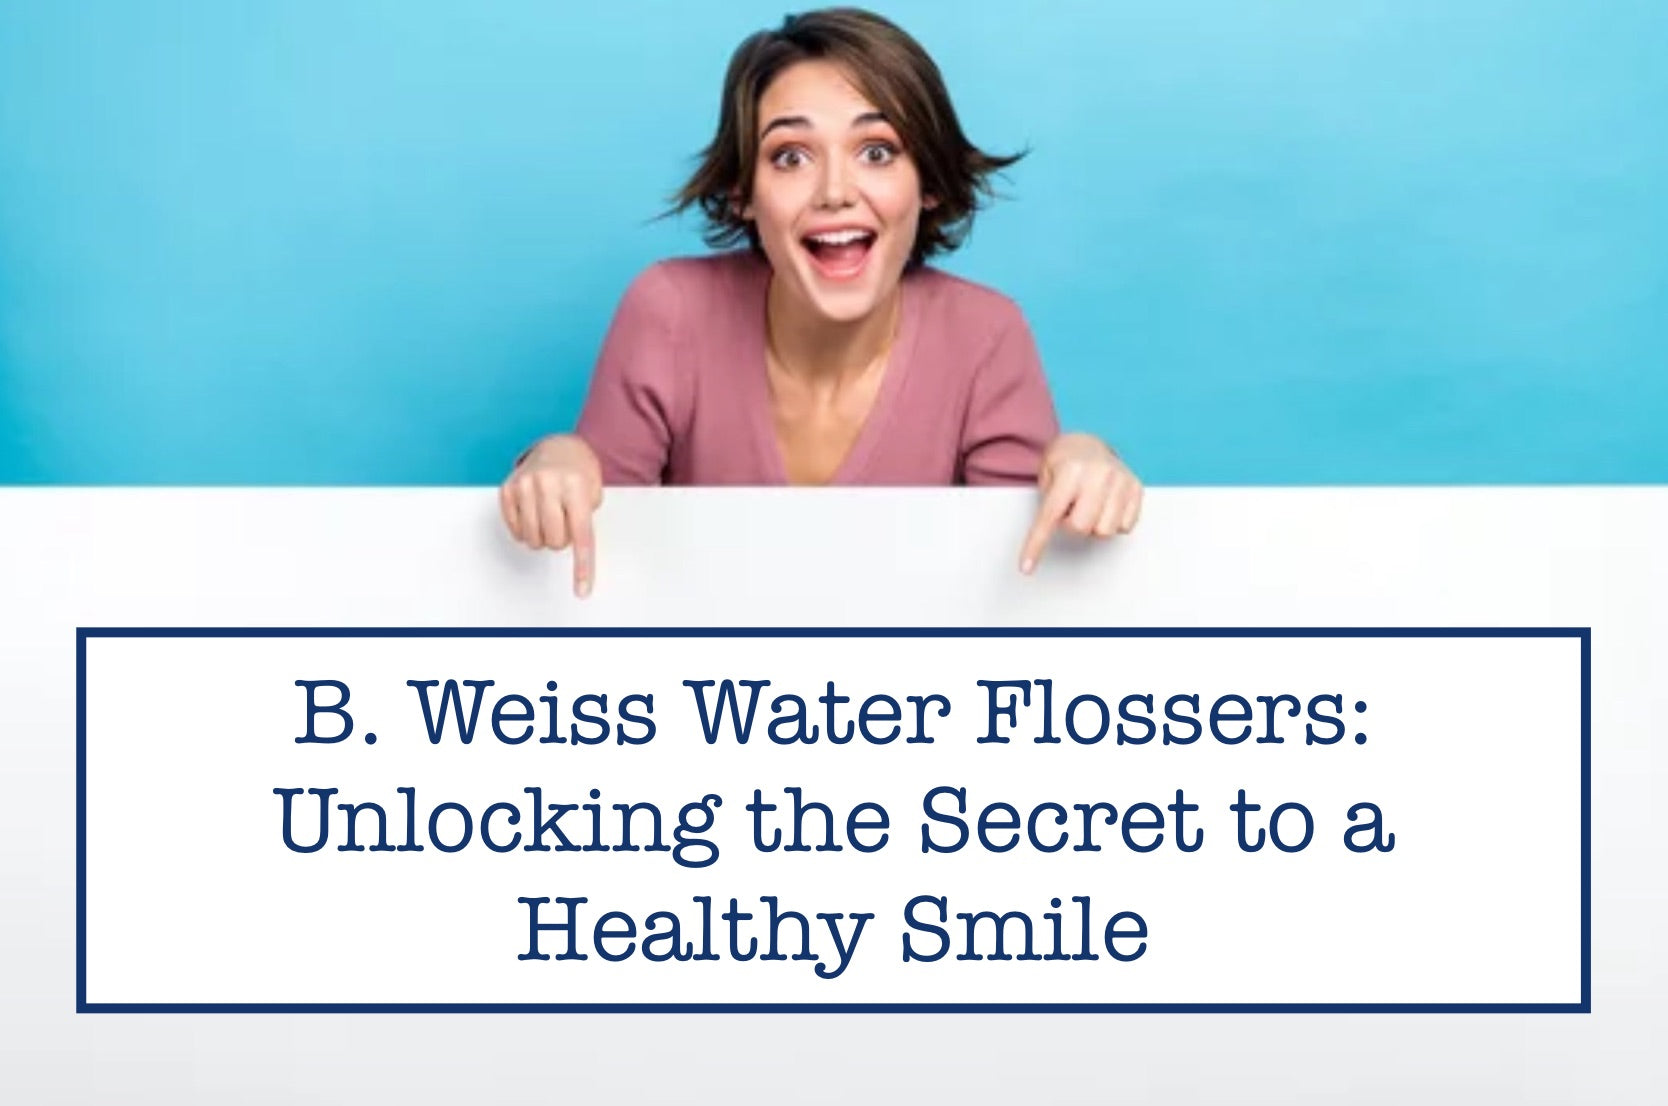 B. Weiss Water Flossers: Unlocking the Secret to a Healthy Smile